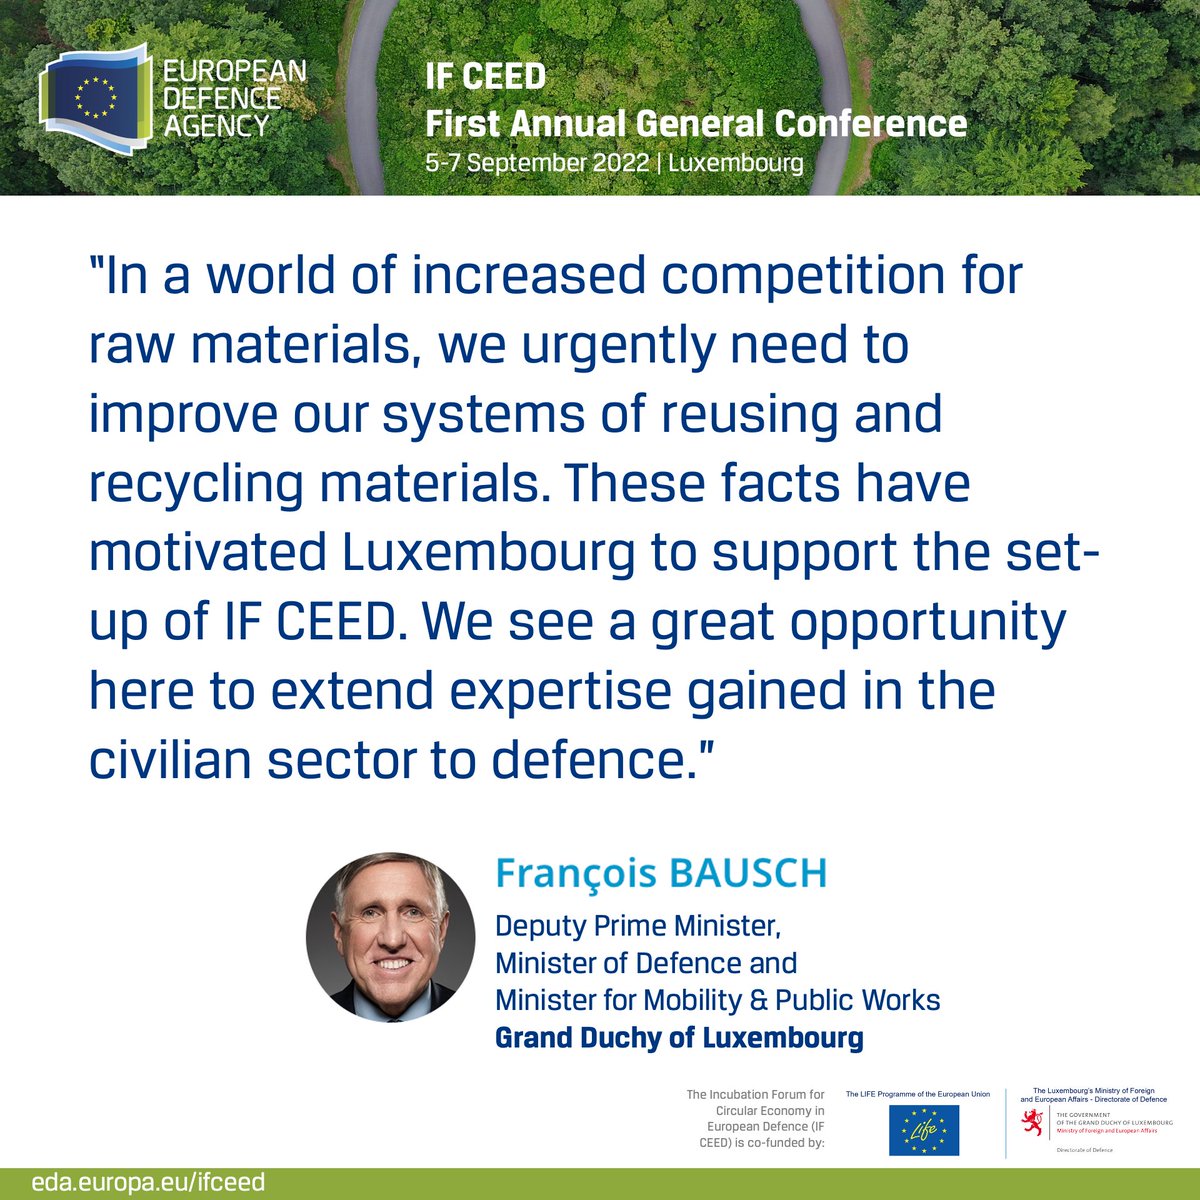 Benefits of #IFCEED include strengthening 🇪🇺 security of supply reducing dependency on critical raw materials

🗣️“In a world of increased competition for raw materials, we urgently need to improve our systems of reusing & recycling materials.” 🇱🇺 Minister @Francois_Bausch